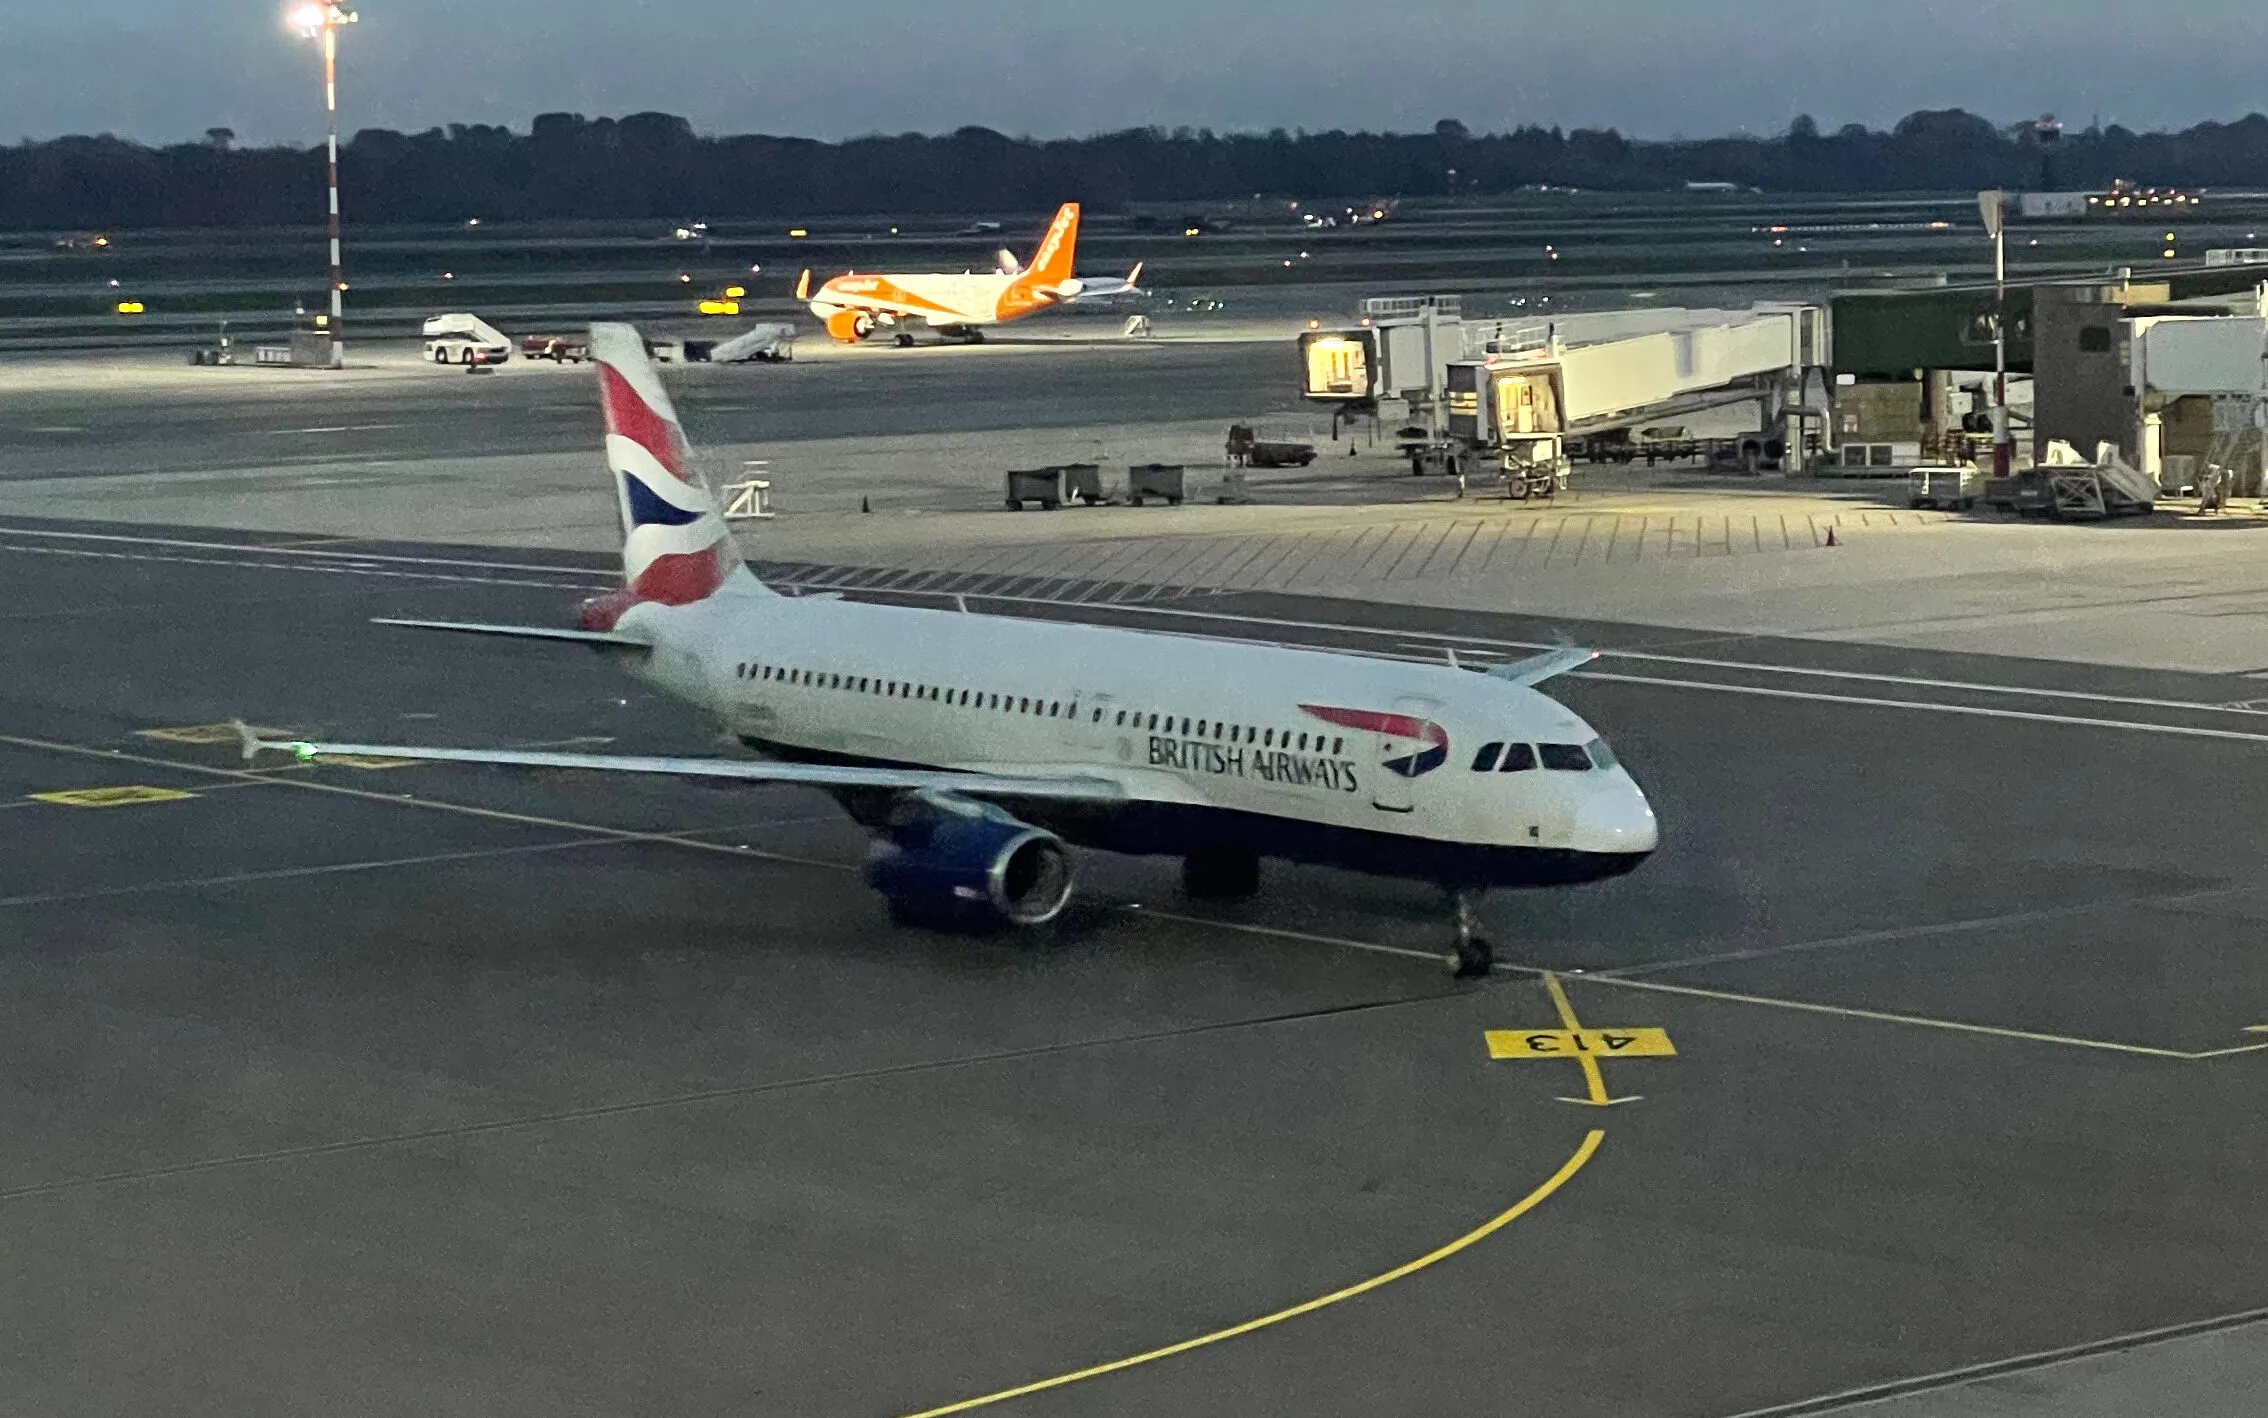 British Airways Plane taxiing towards the gate